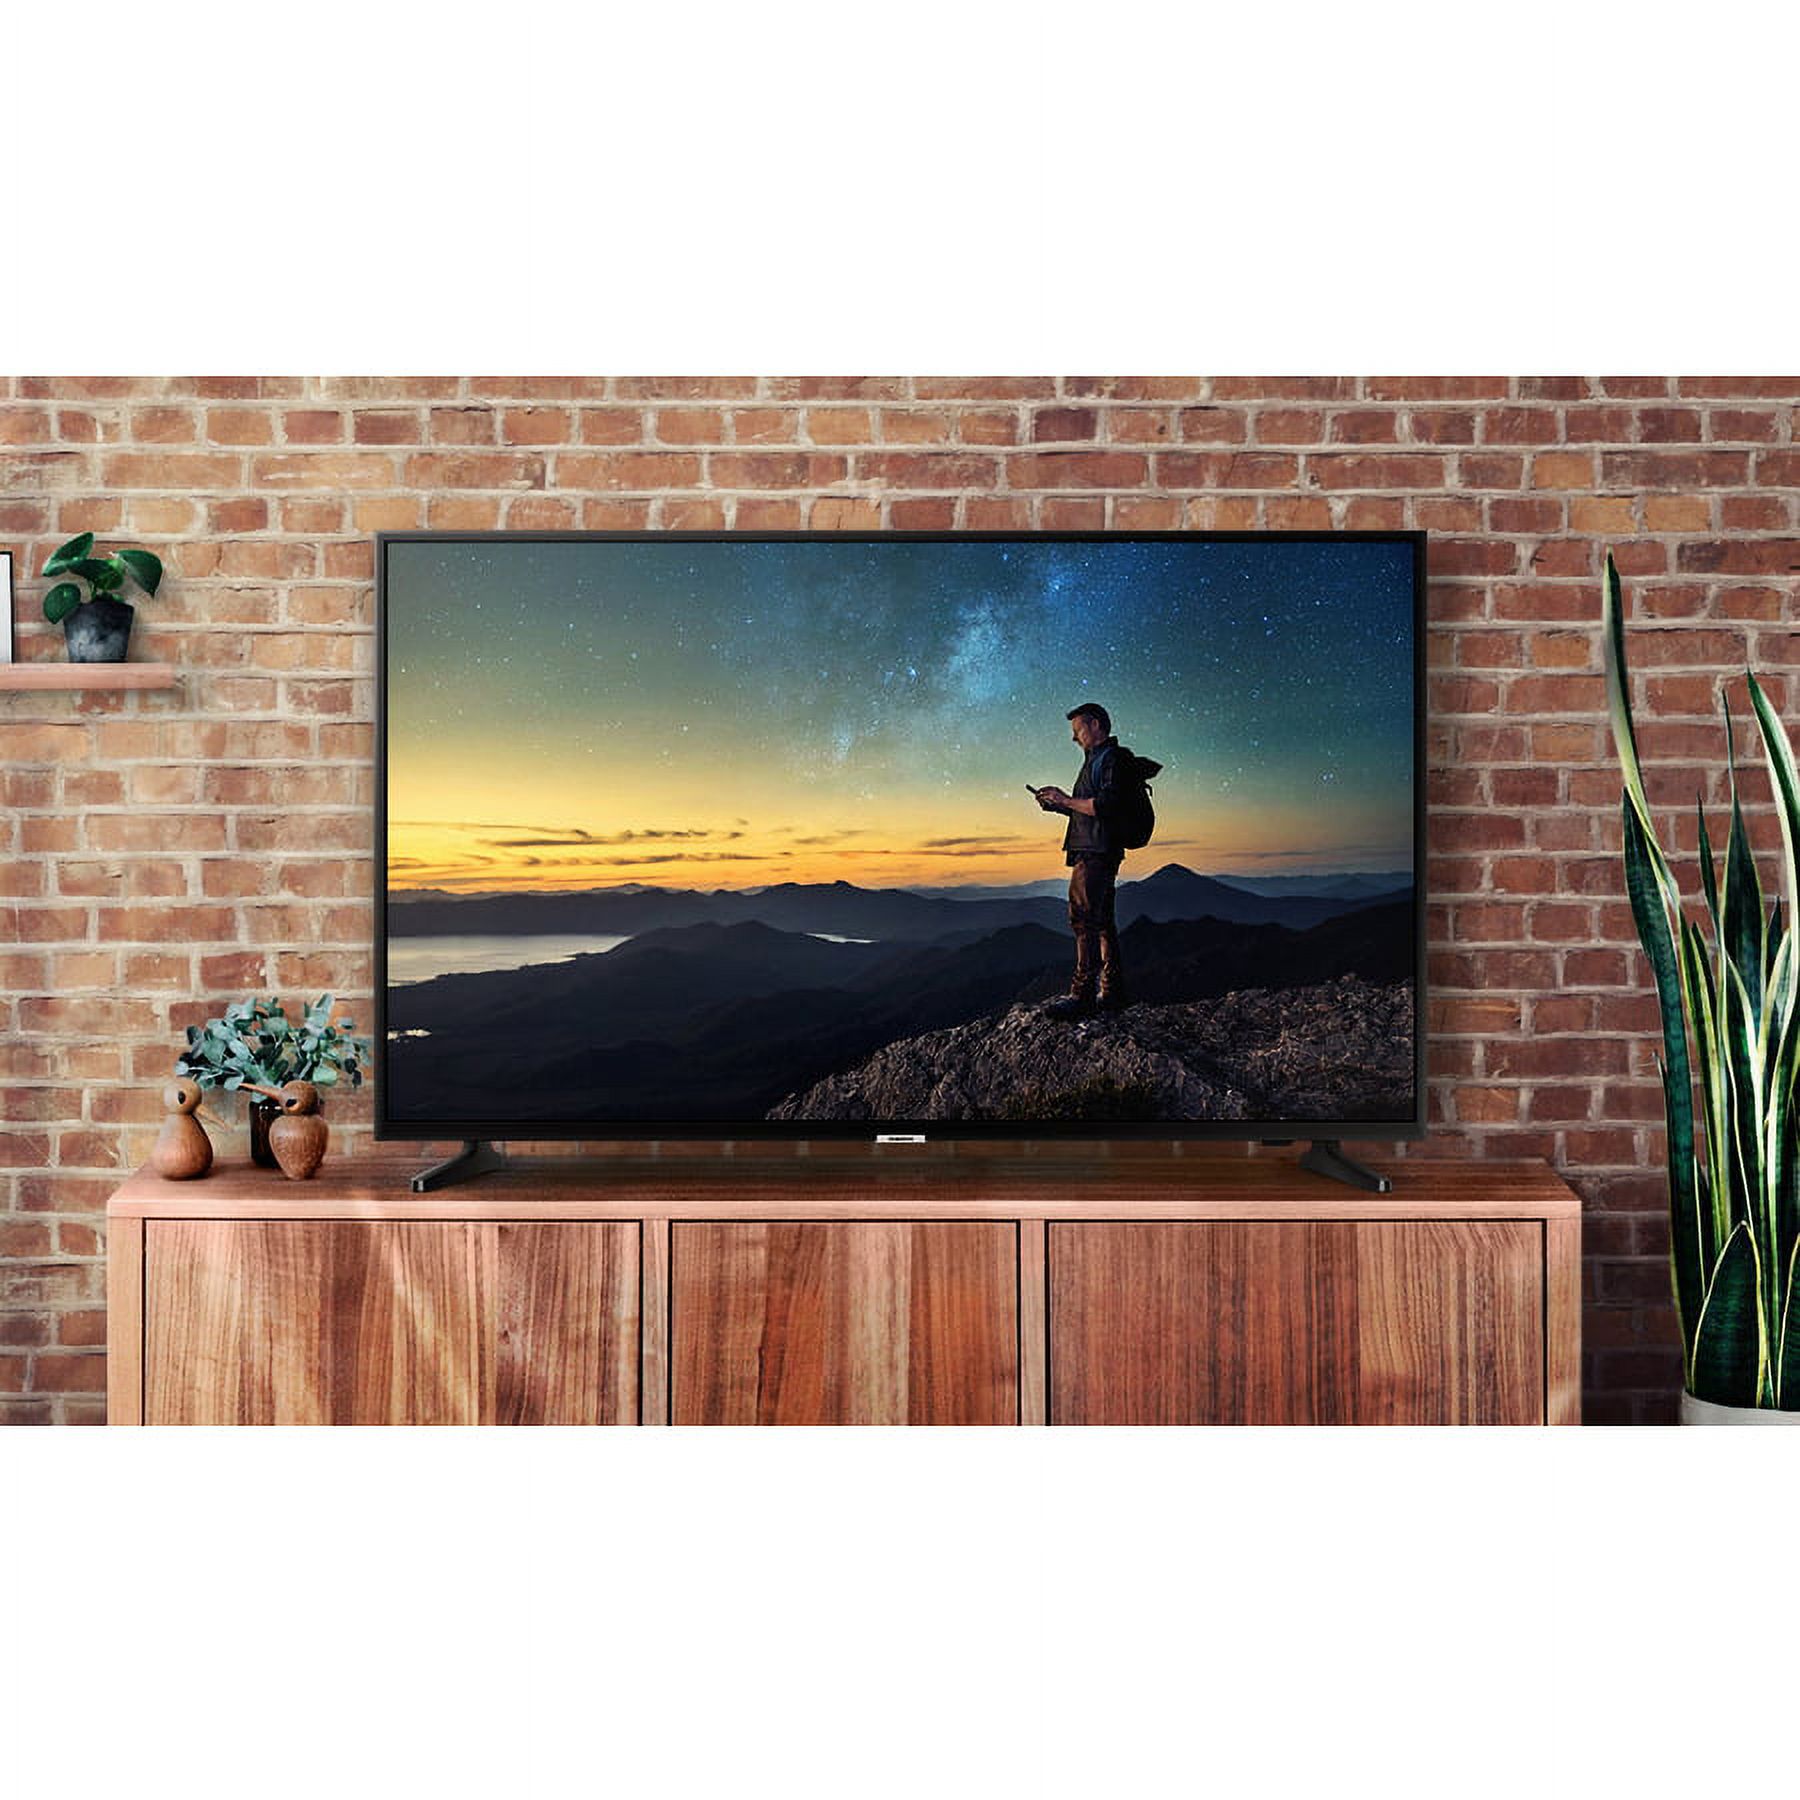 SAMSUNG 50" Class 4K UHD 2160p LED Smart TV with HDR UN50NU6900 - image 6 of 6